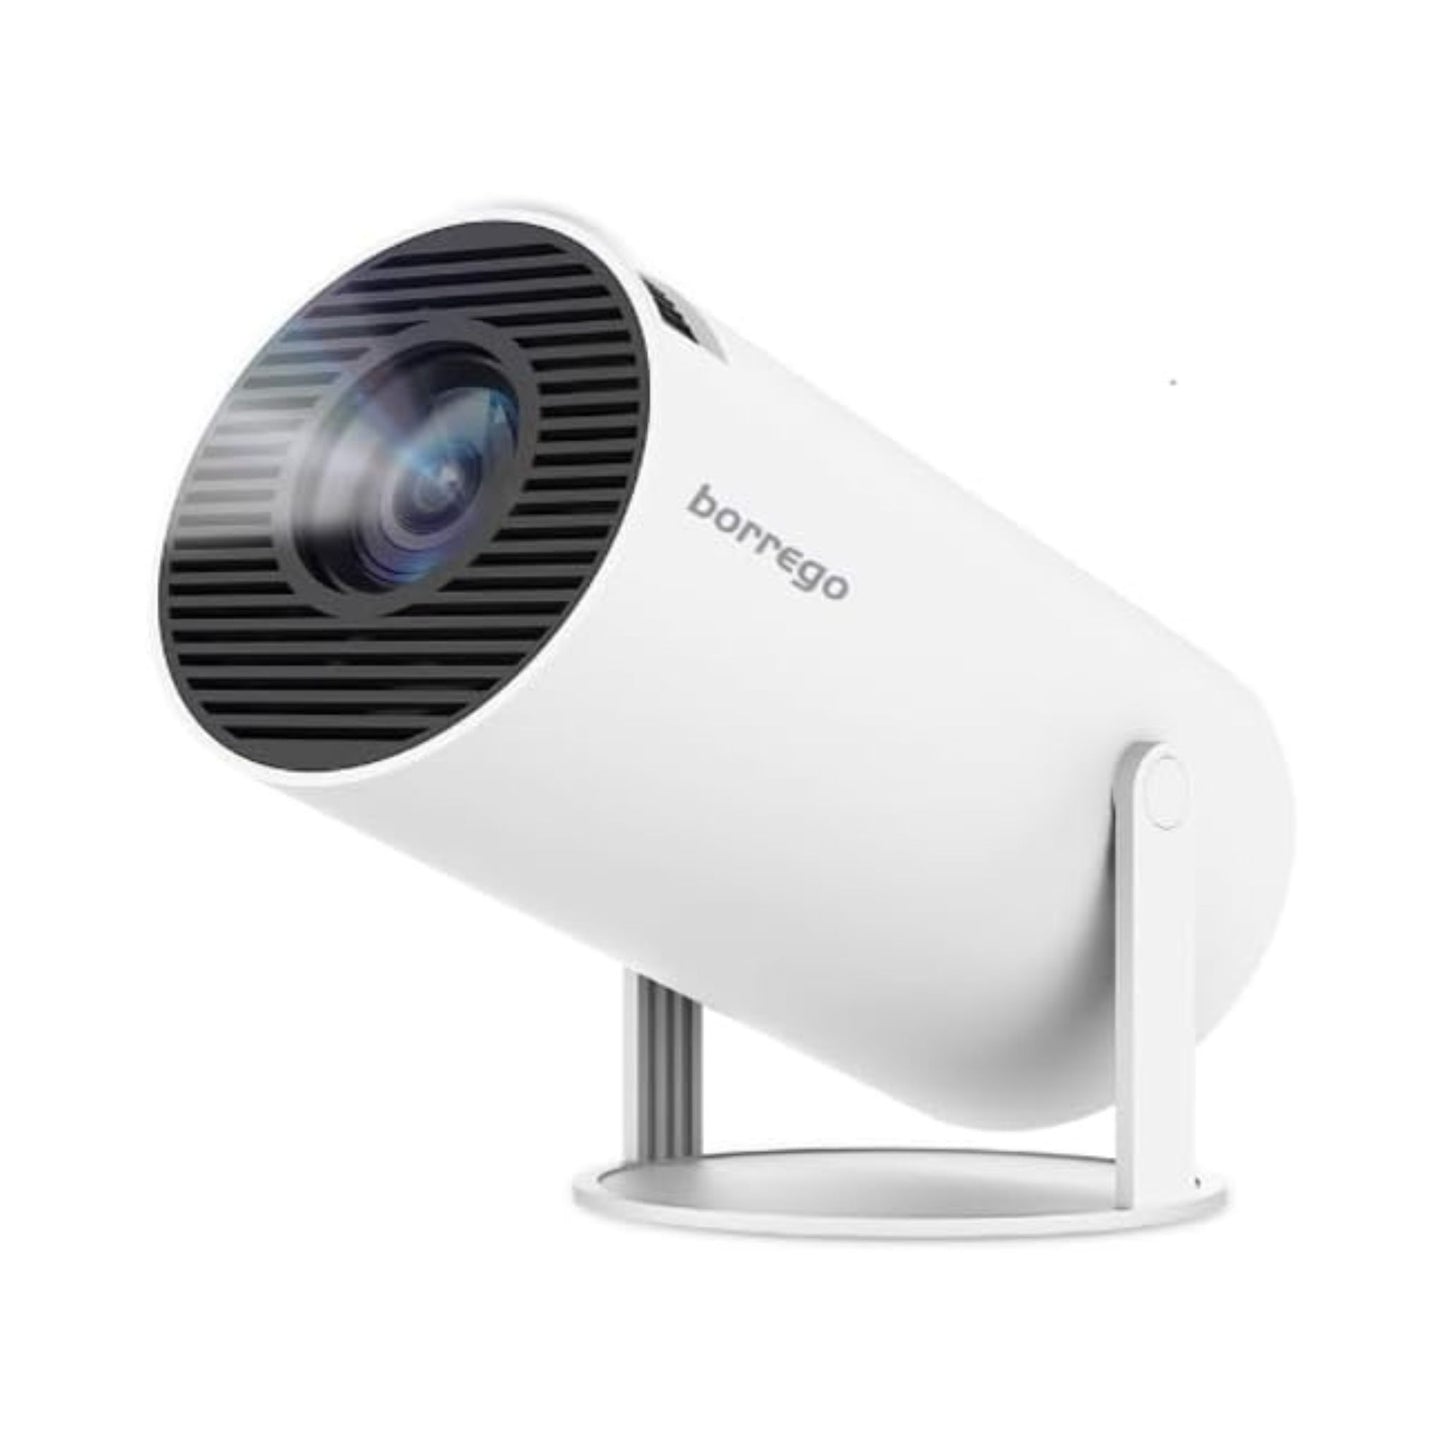 Borrego Smart 2 Pro Android Projector_LCD_Portable Wi Fi Android Model_White